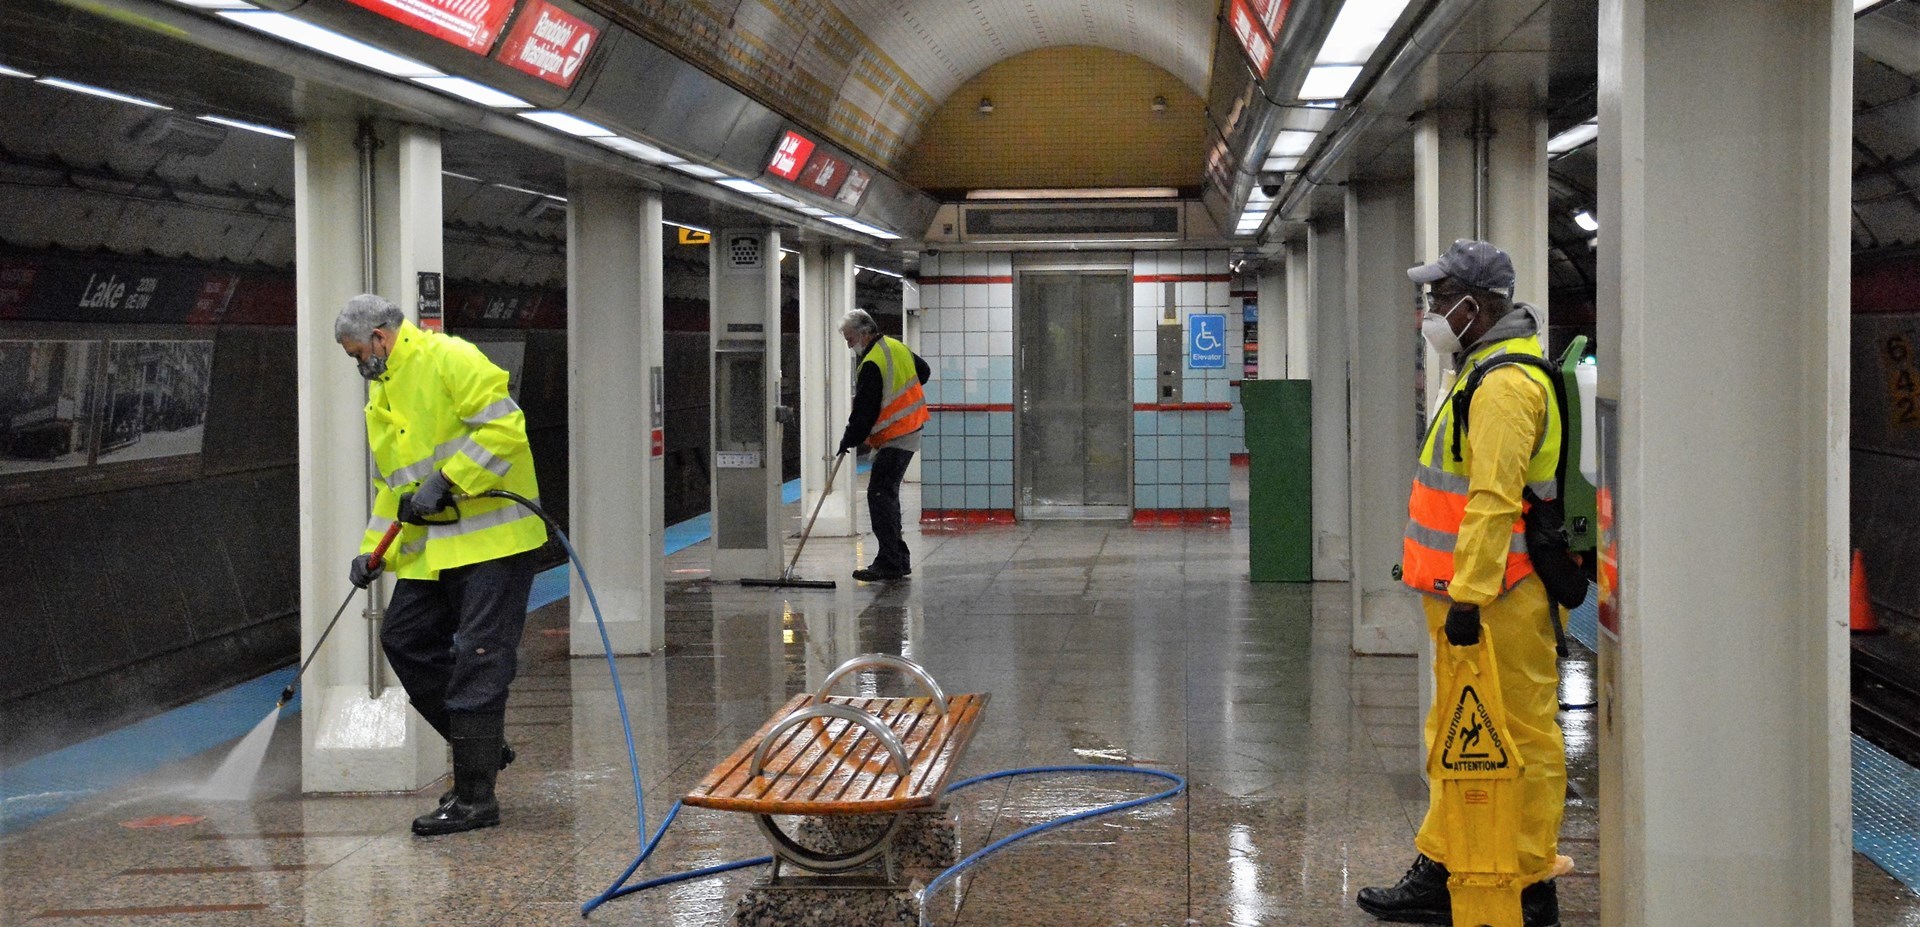 CTA personnel power washing a subway station